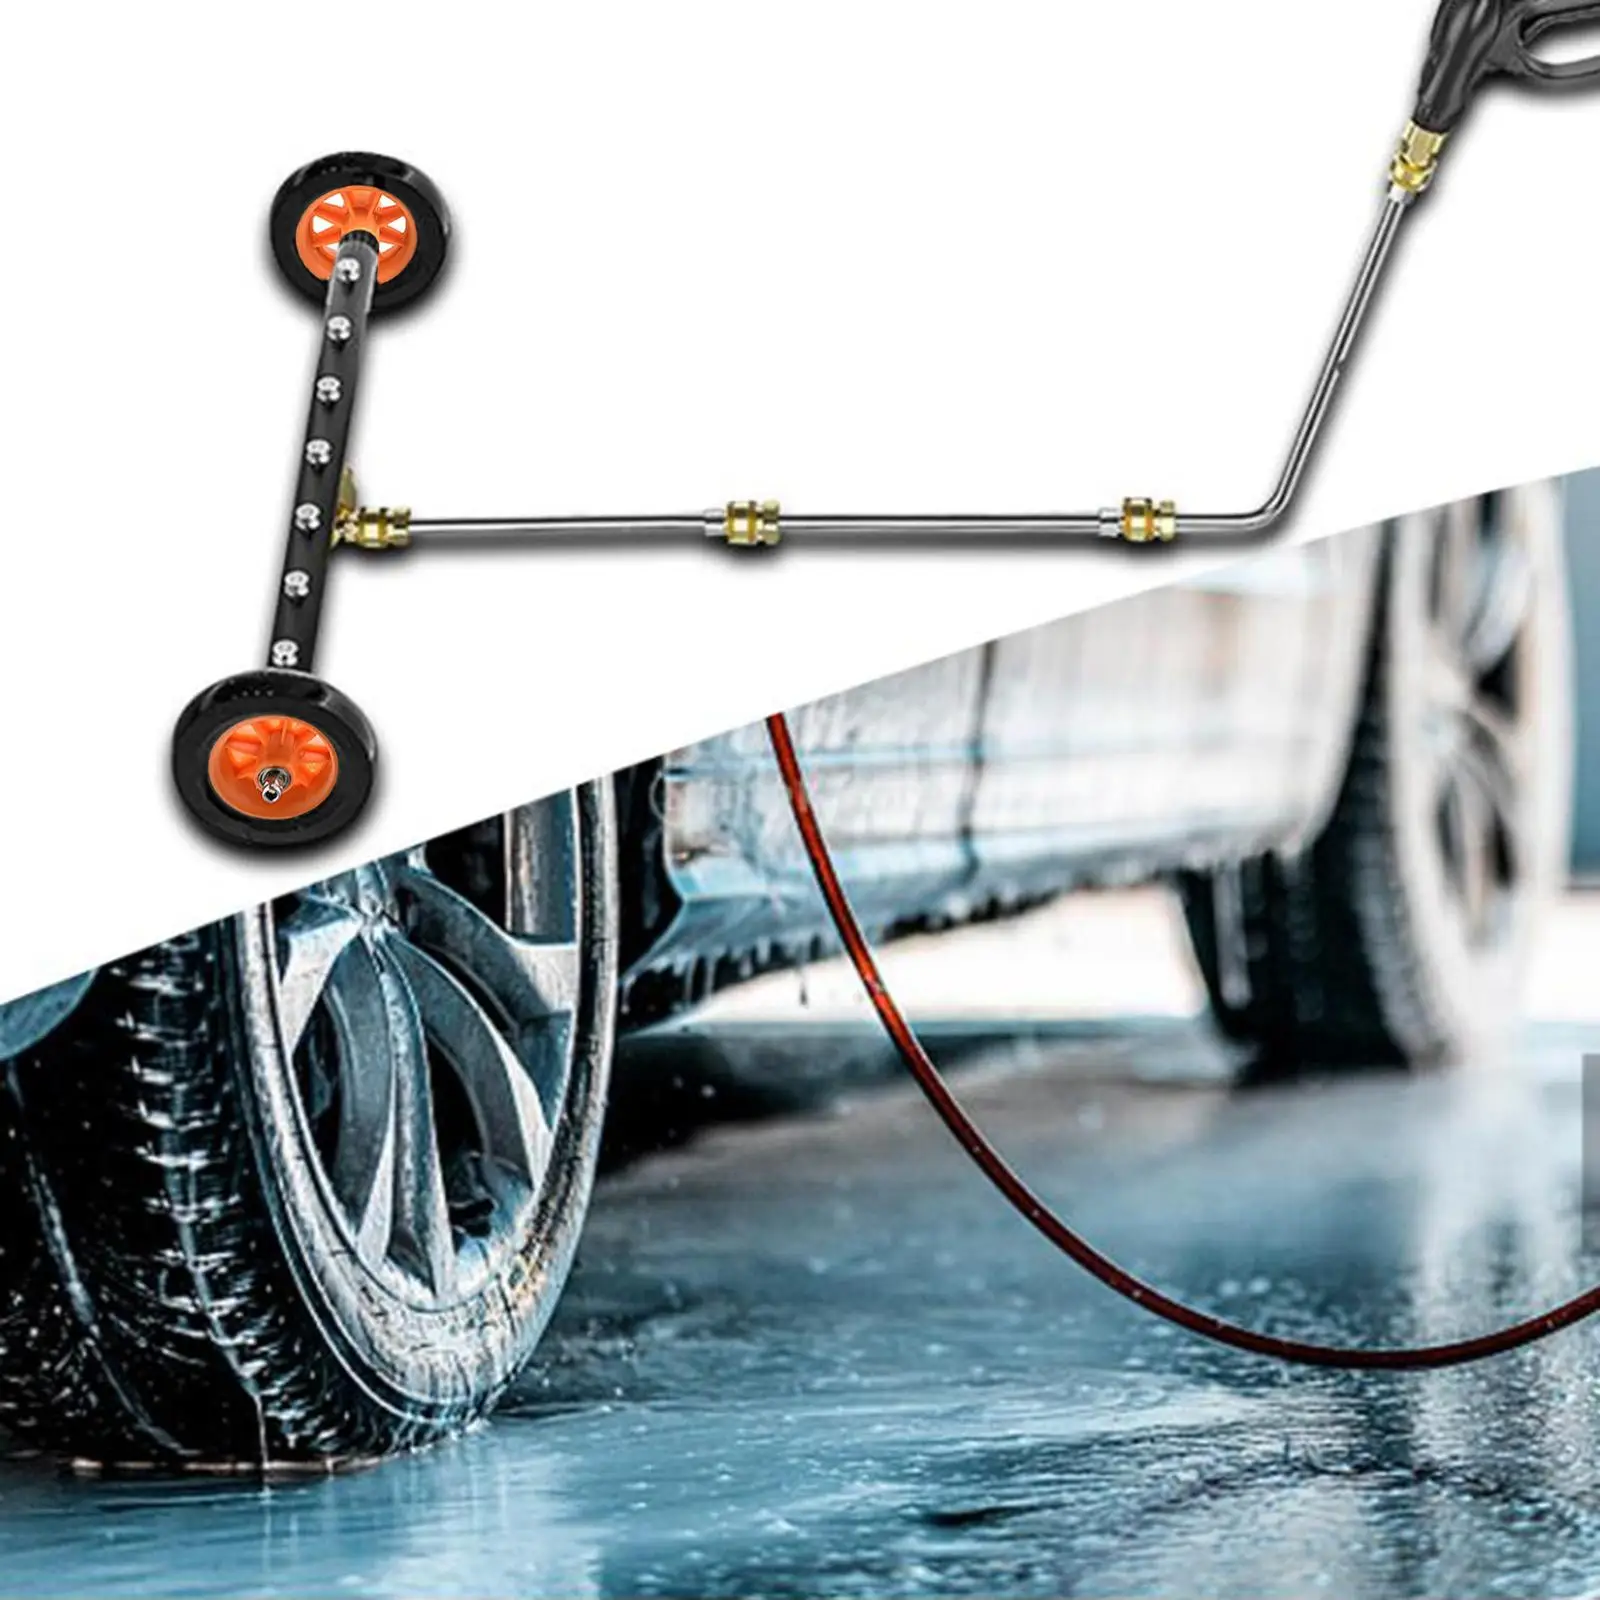 under Car Washer Water Broom 4000PSI 90 Degree Angled Wands Power Washer Attachment Pressure Washer Undercarriage Cleaner for RV